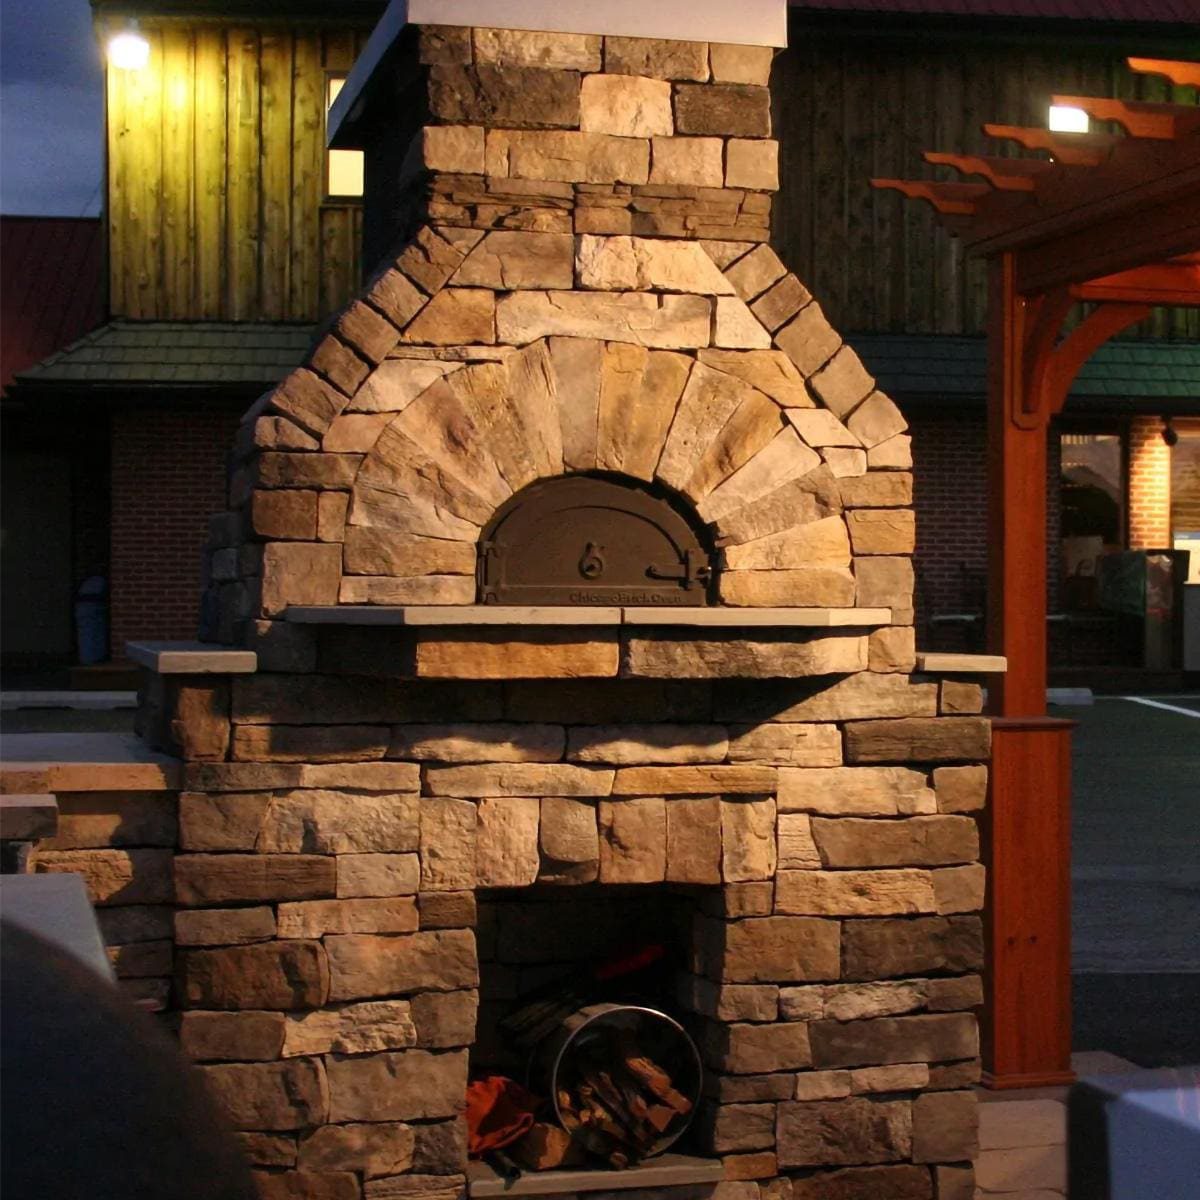 Chicago Brick Oven Wood Fired Diy Kit